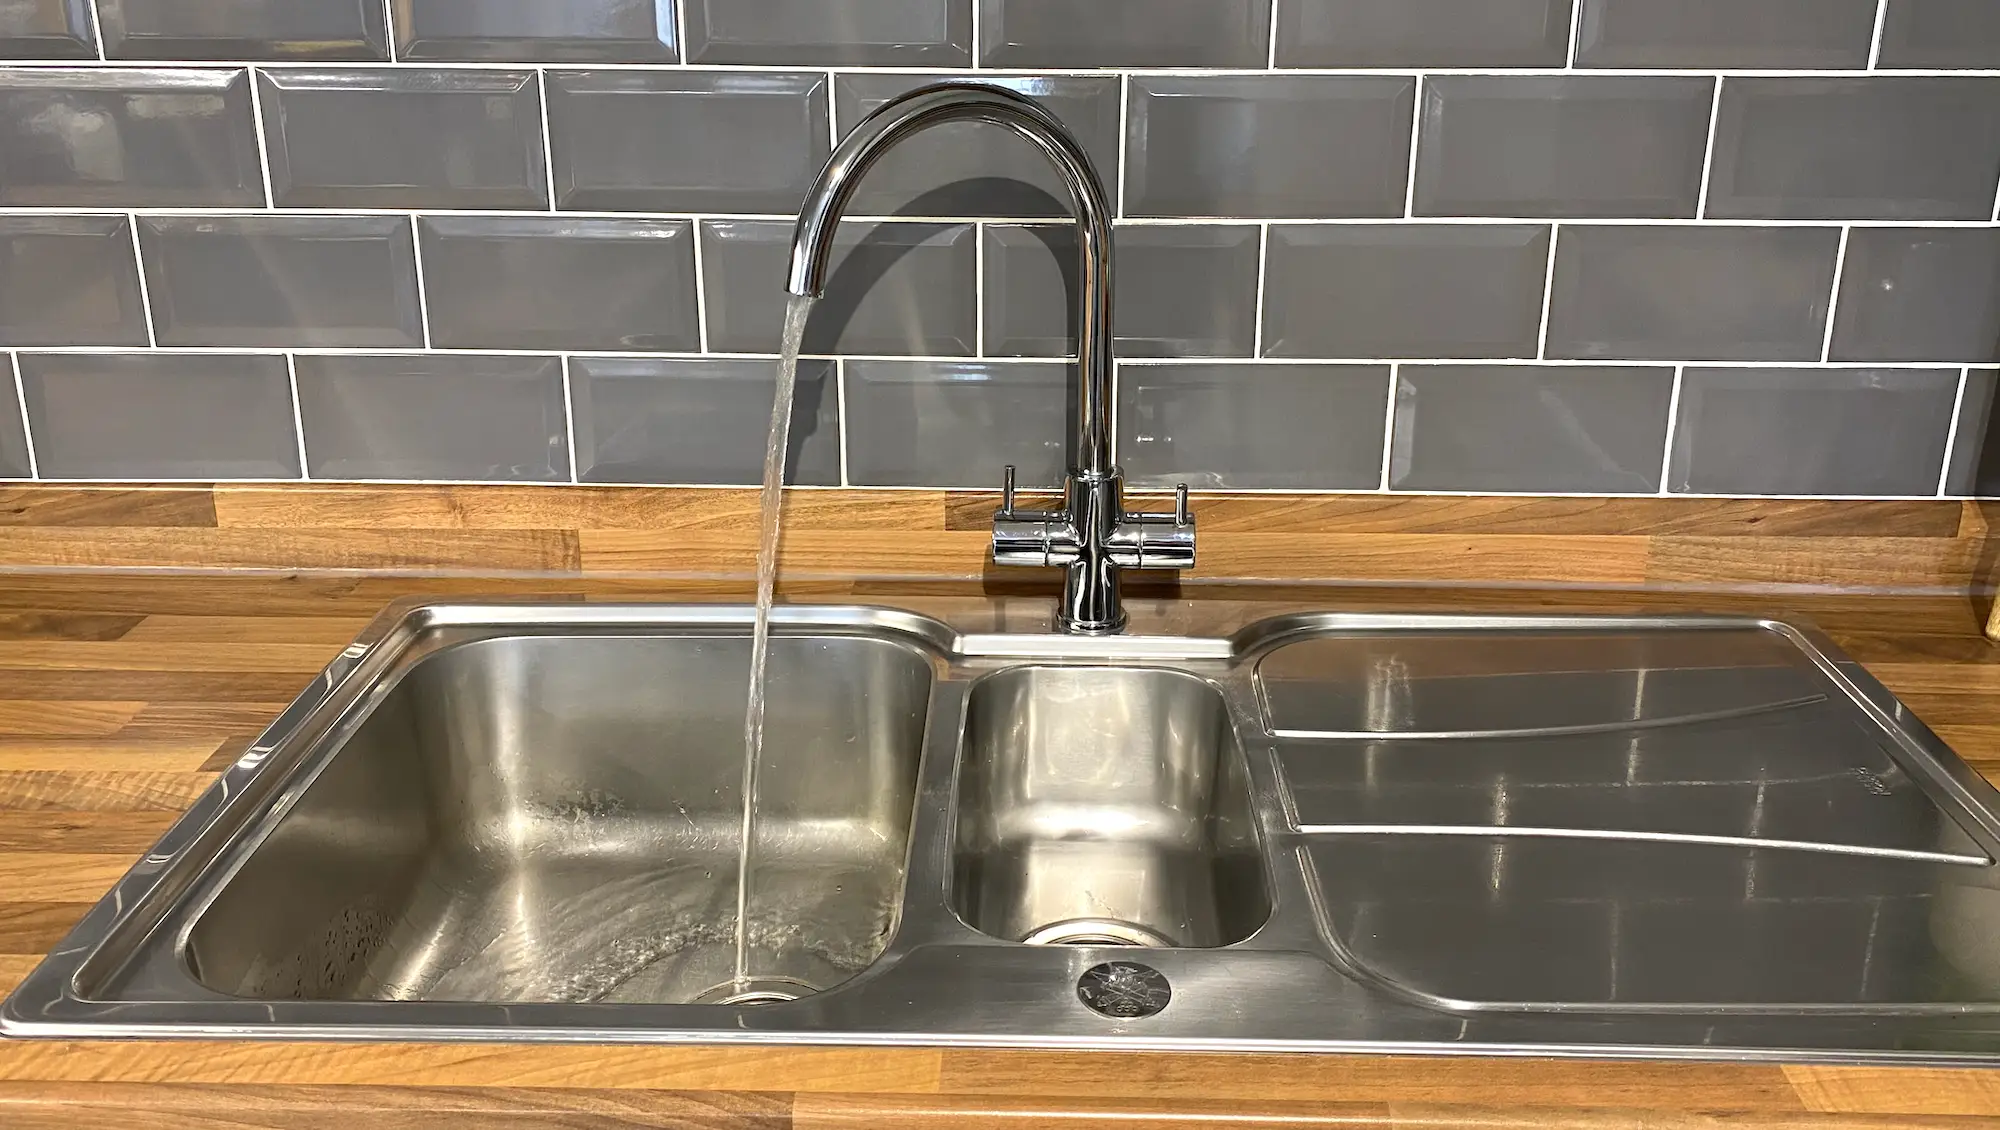 Estimates for replace a kitchen mixer tap near Cannock Chase